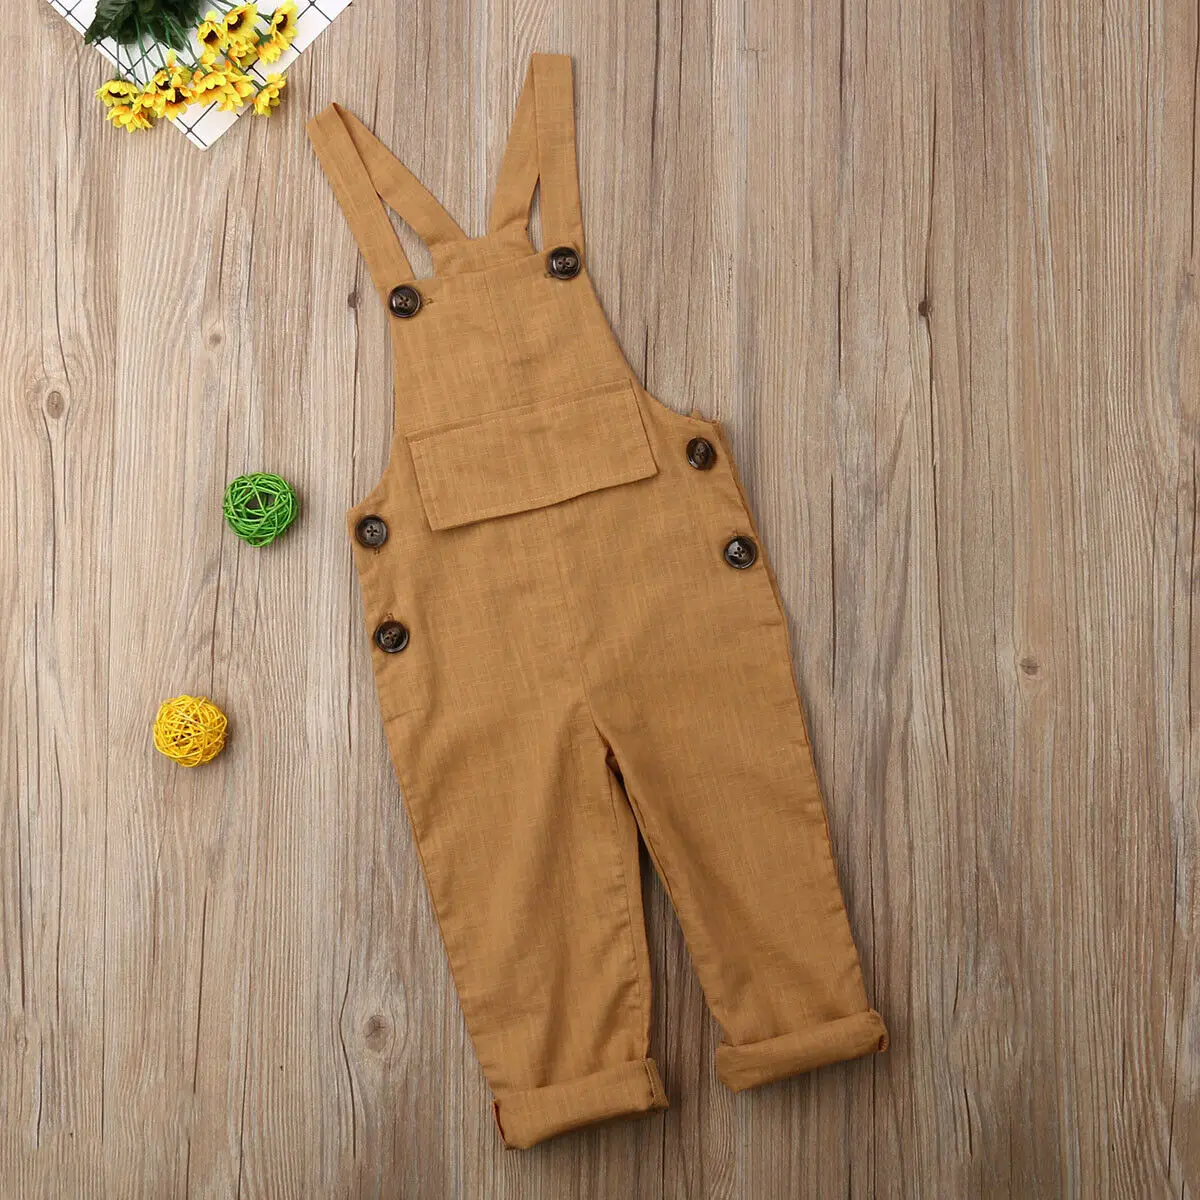 Baby Summer Clothing Linen Toddler Kid Girl Overalls Romper Jumpsuit Clothes Suspender Pants Solid Outfit 0-3T